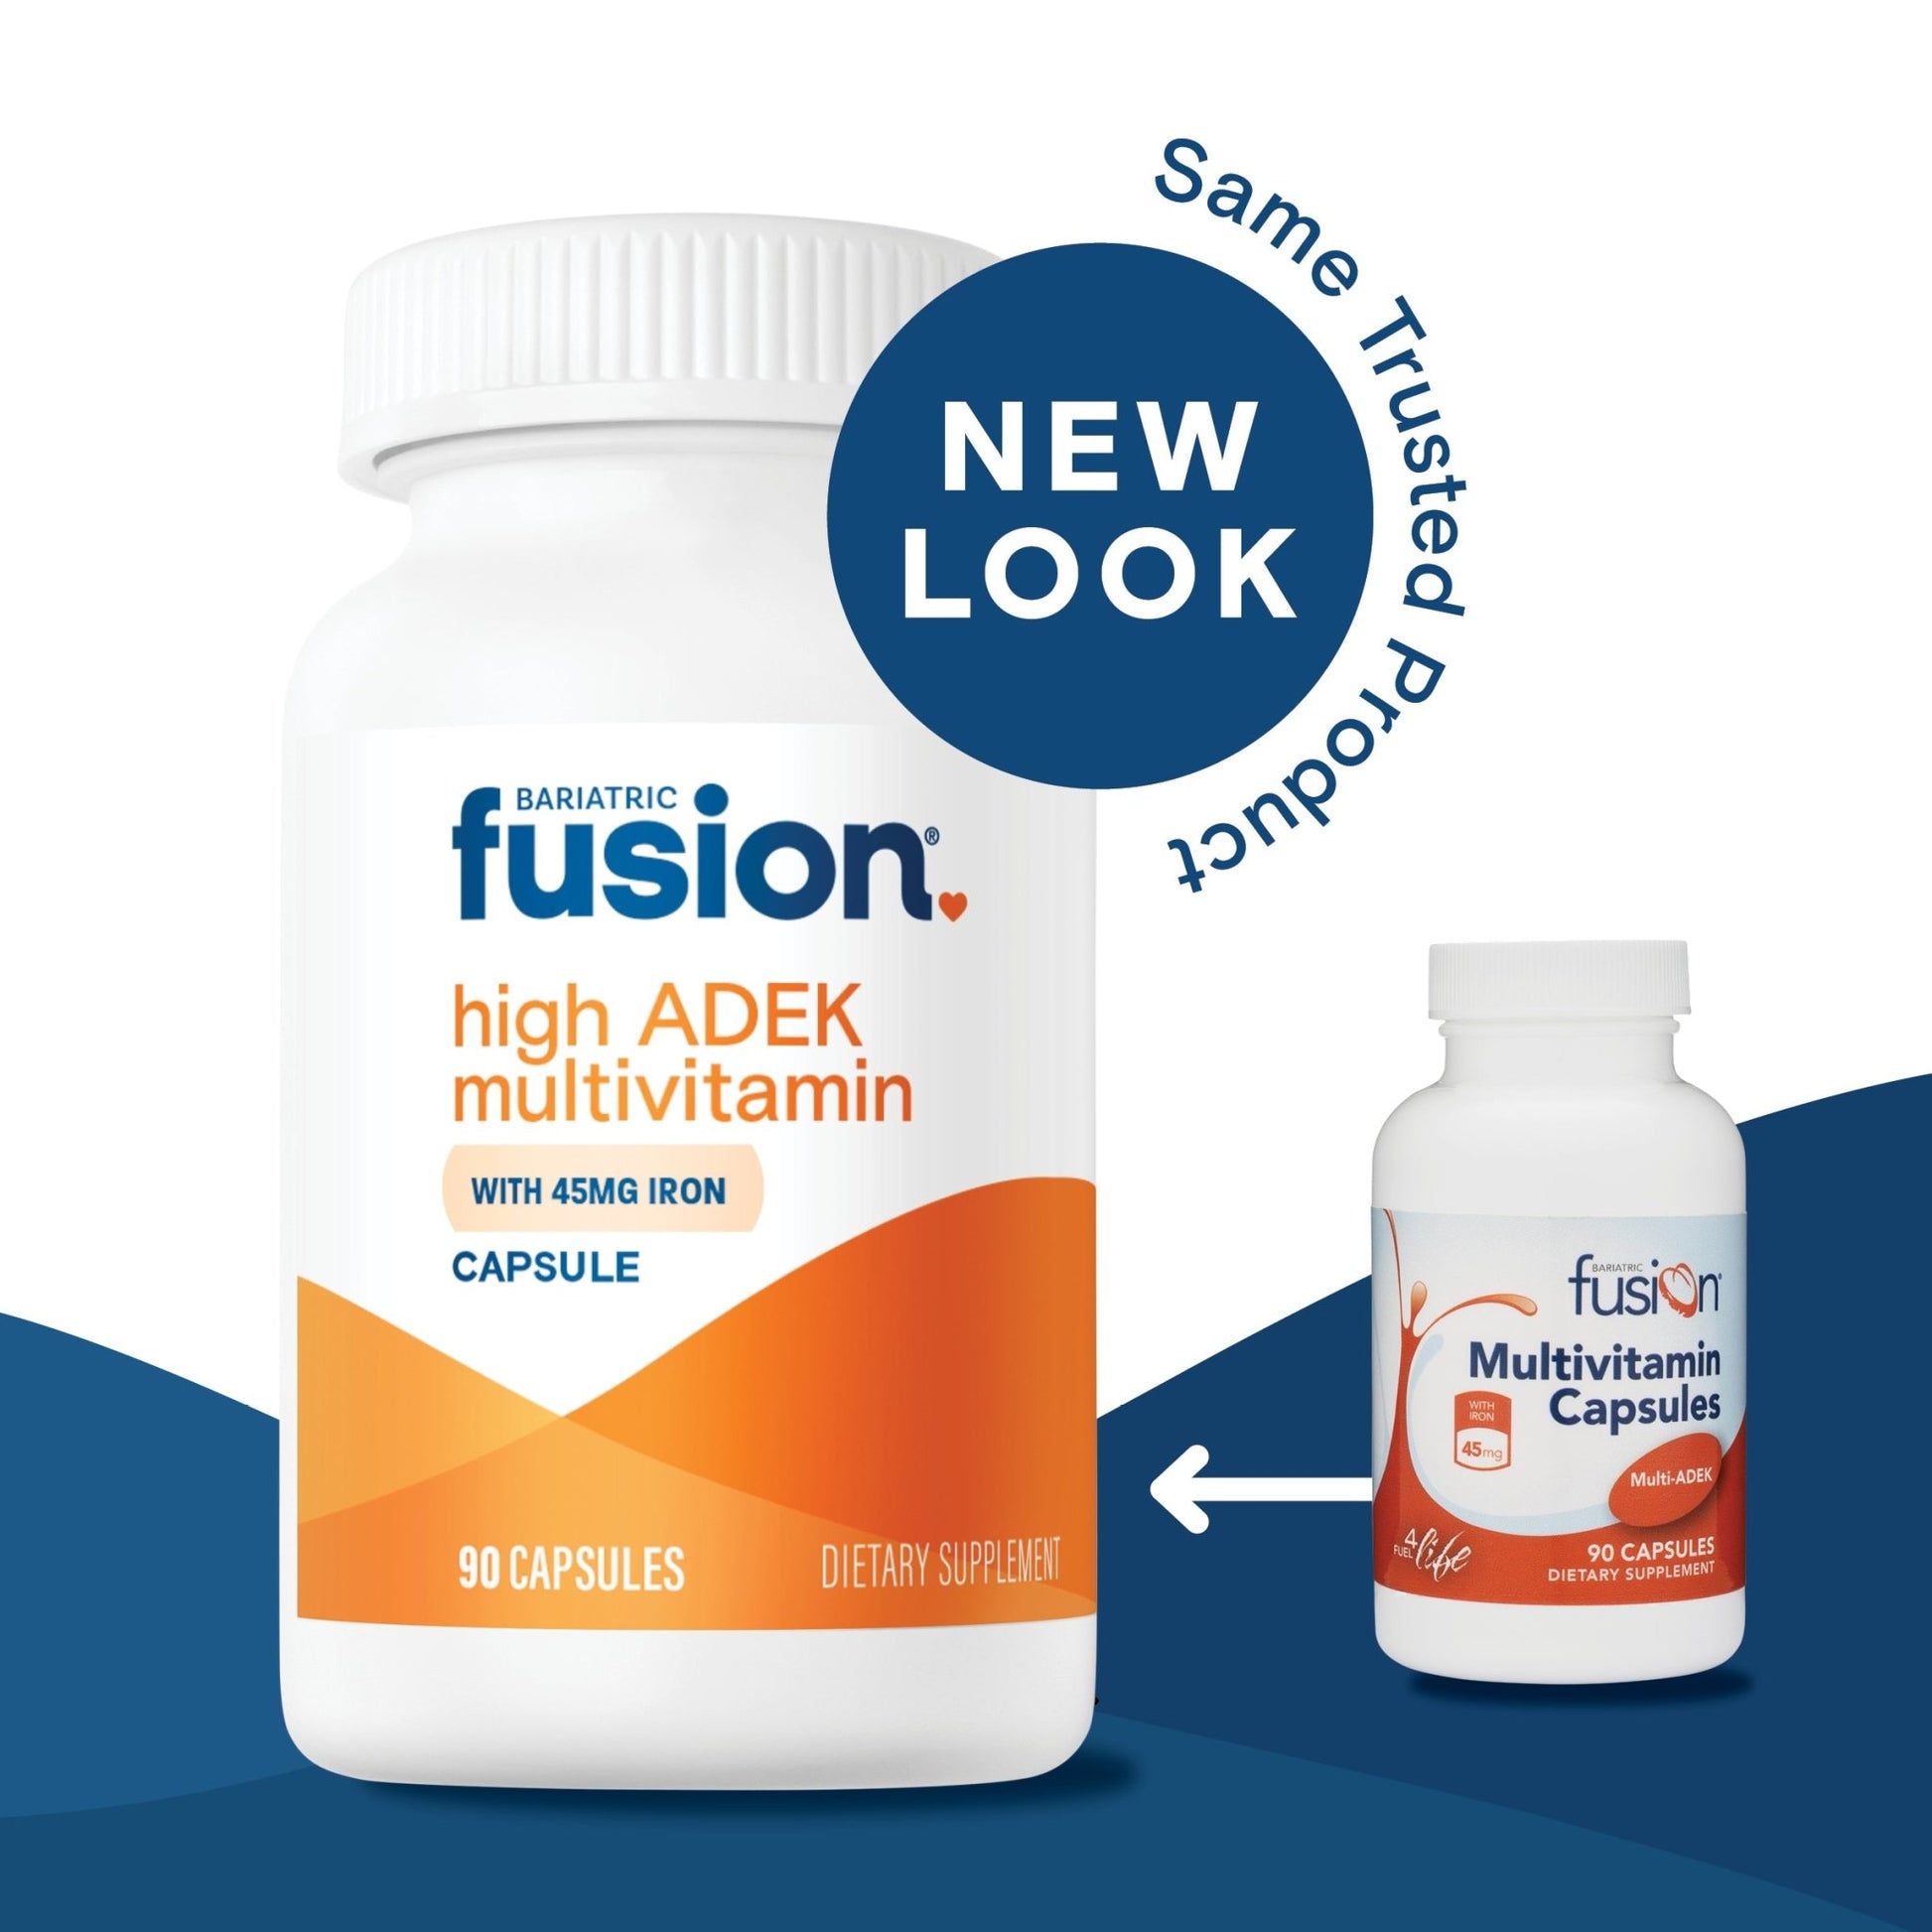 Bariatric Fusion high ADEK Multivitamin Capsules with Iron bundle new look, same trusted product.